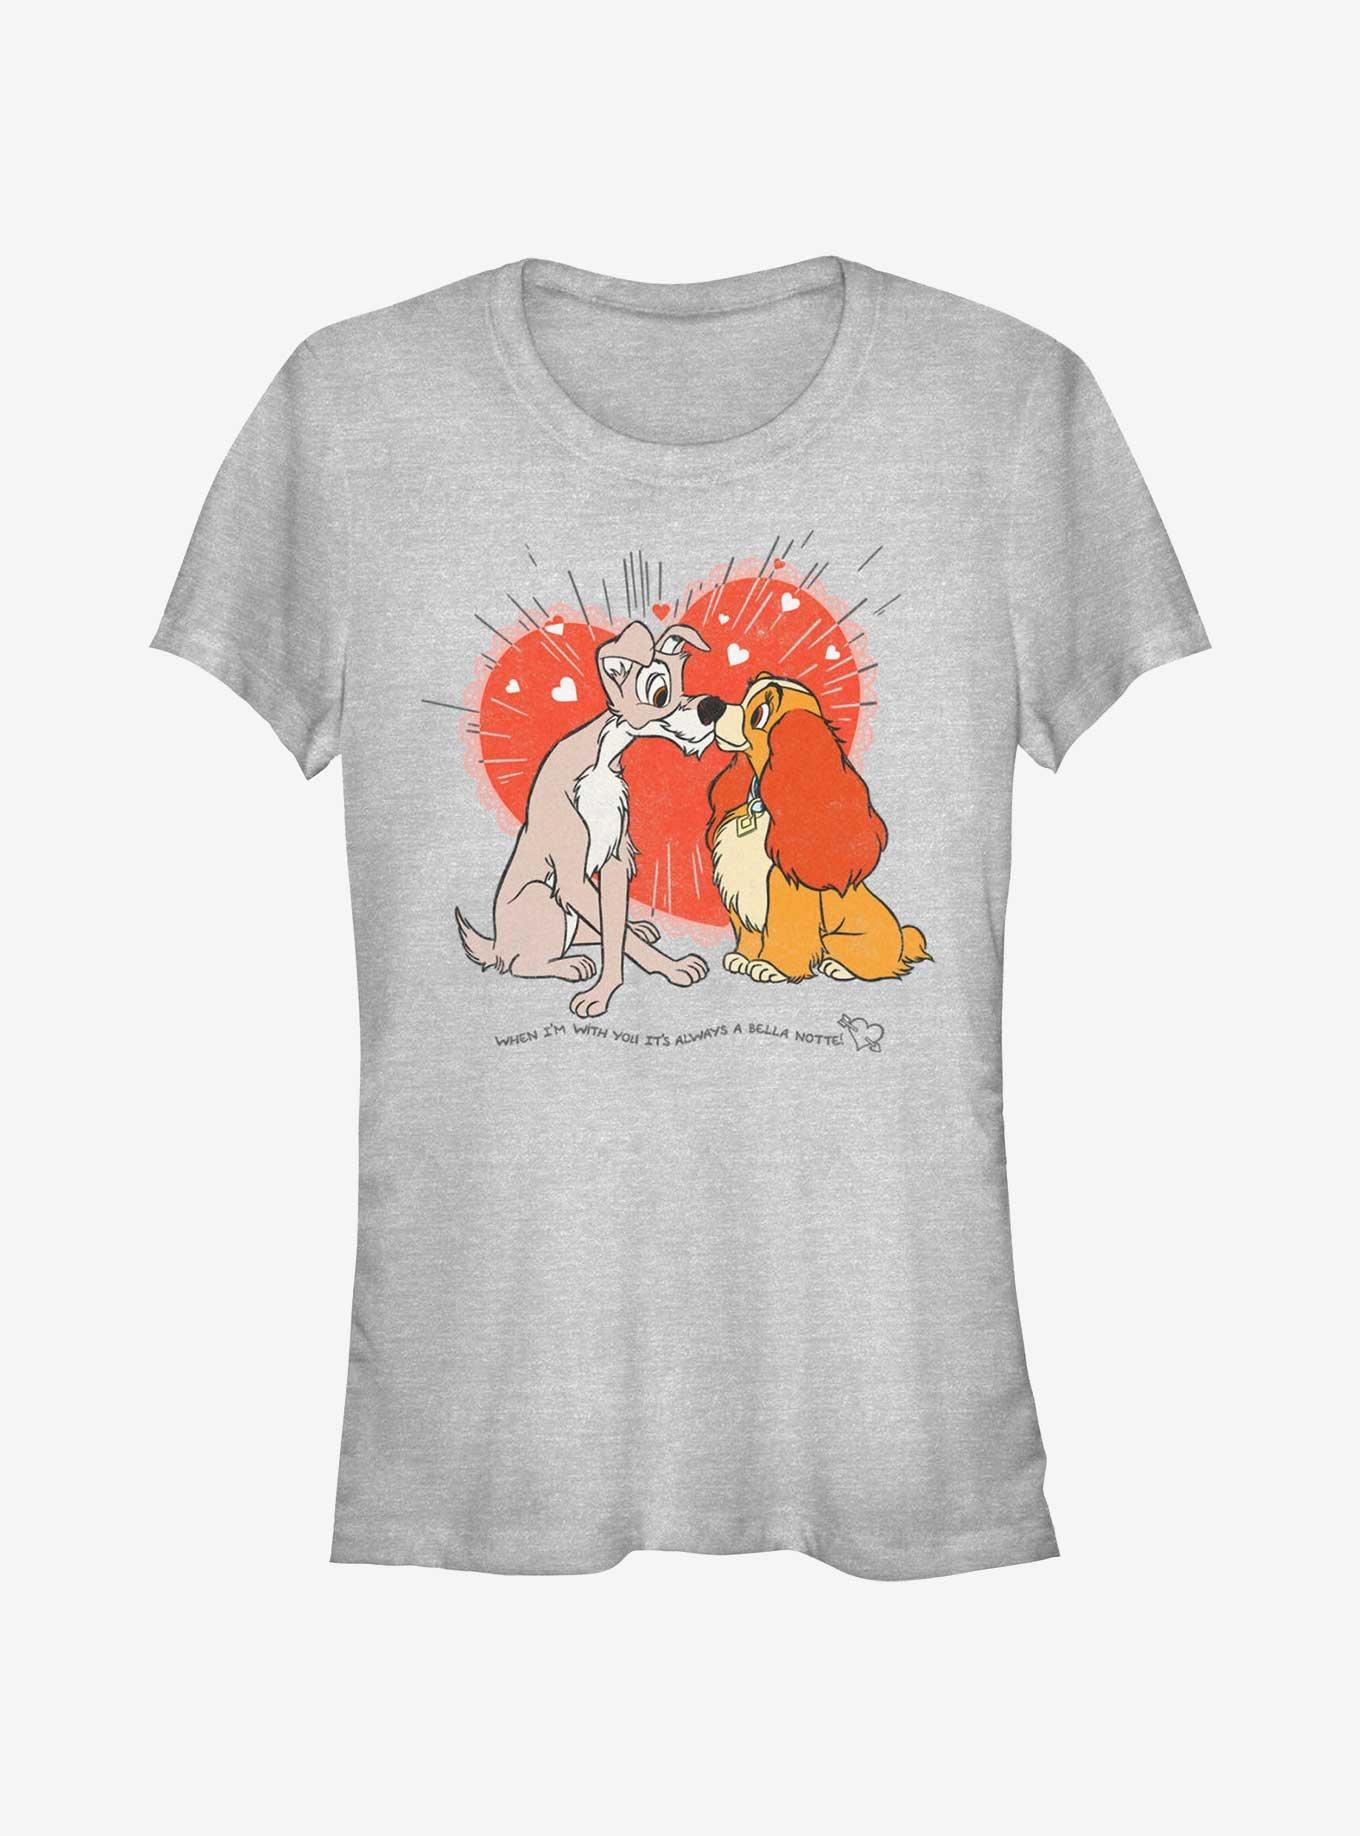 Disney Lady and the Tramp Bella Notte Lovers Girls T-Shirt